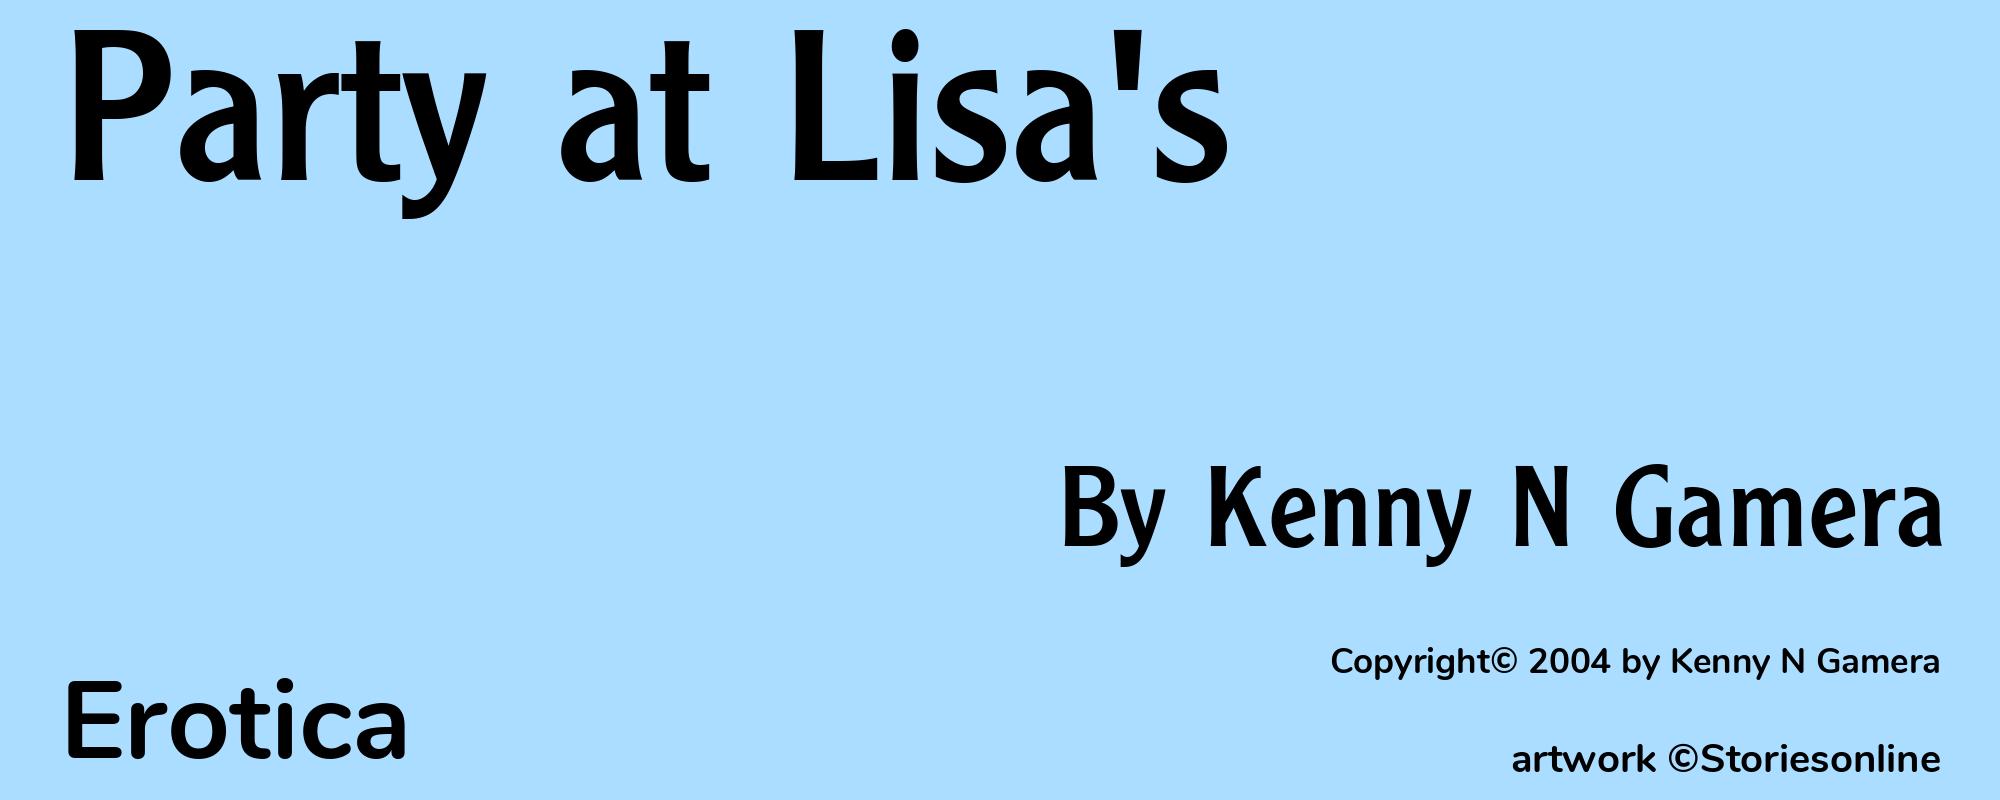 Party at Lisa's - Cover